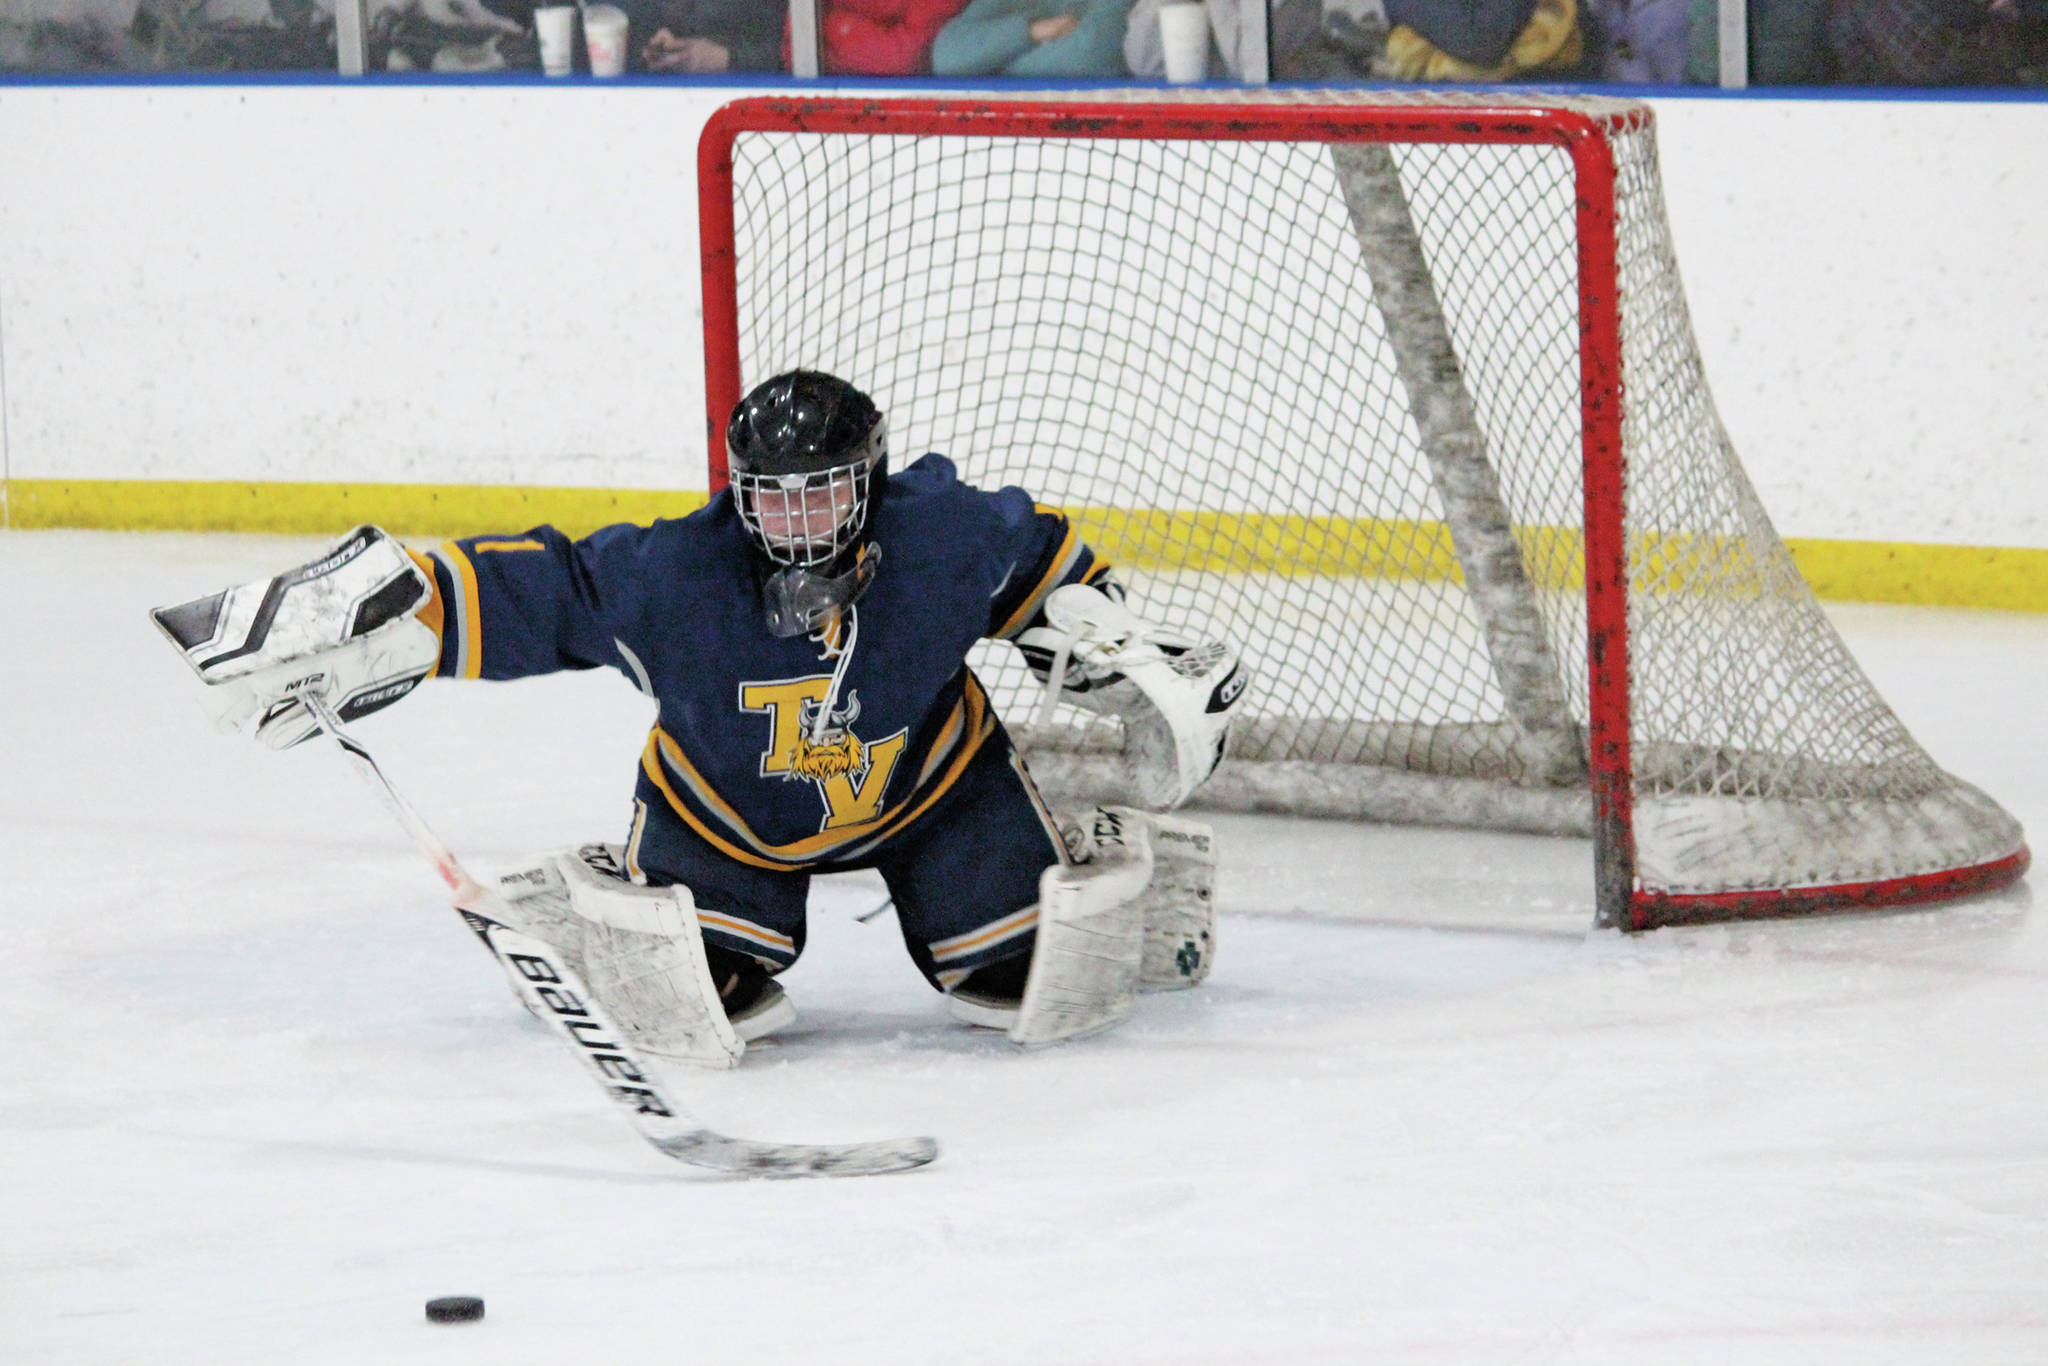 Tri-Valley School goaltender Danny Renshaw reaches out to block the puck during a Thursday, Jan. 30, 2020 hockey game against Homer High School at Kevin Bell Arena in Homer, Alaska. (Photo by Megan Pacer/Homer News)